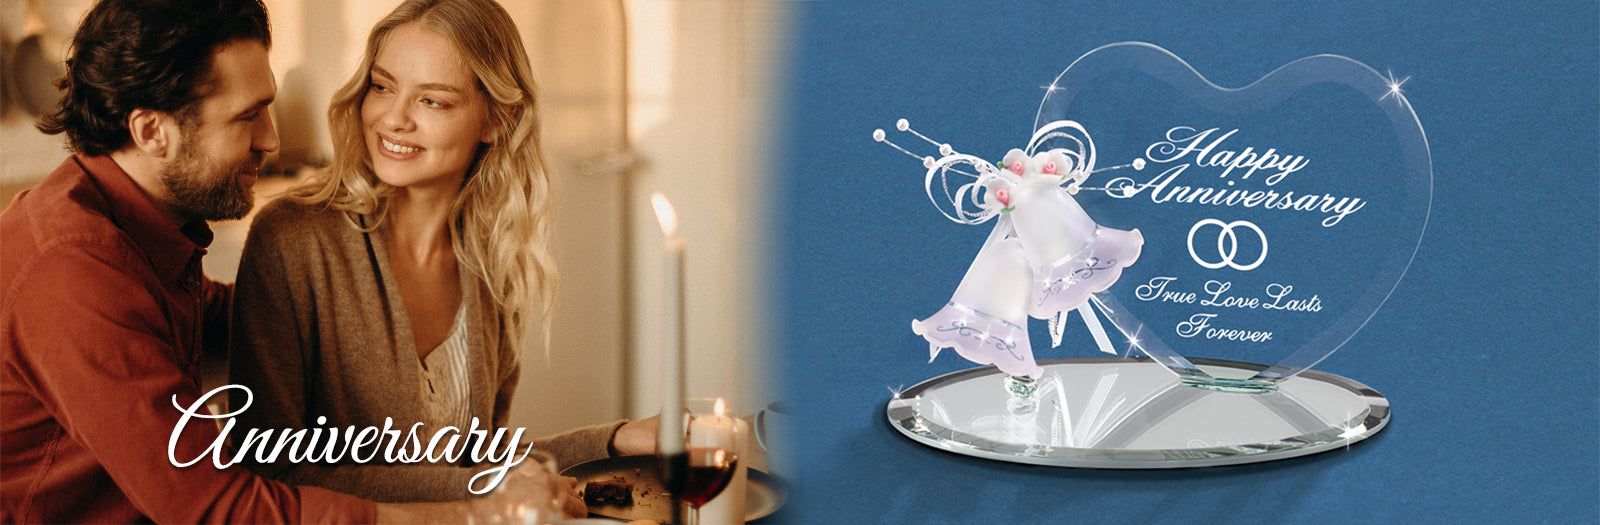 Shop handcrafted glass art Anniversary Figurines to celebrate the years.